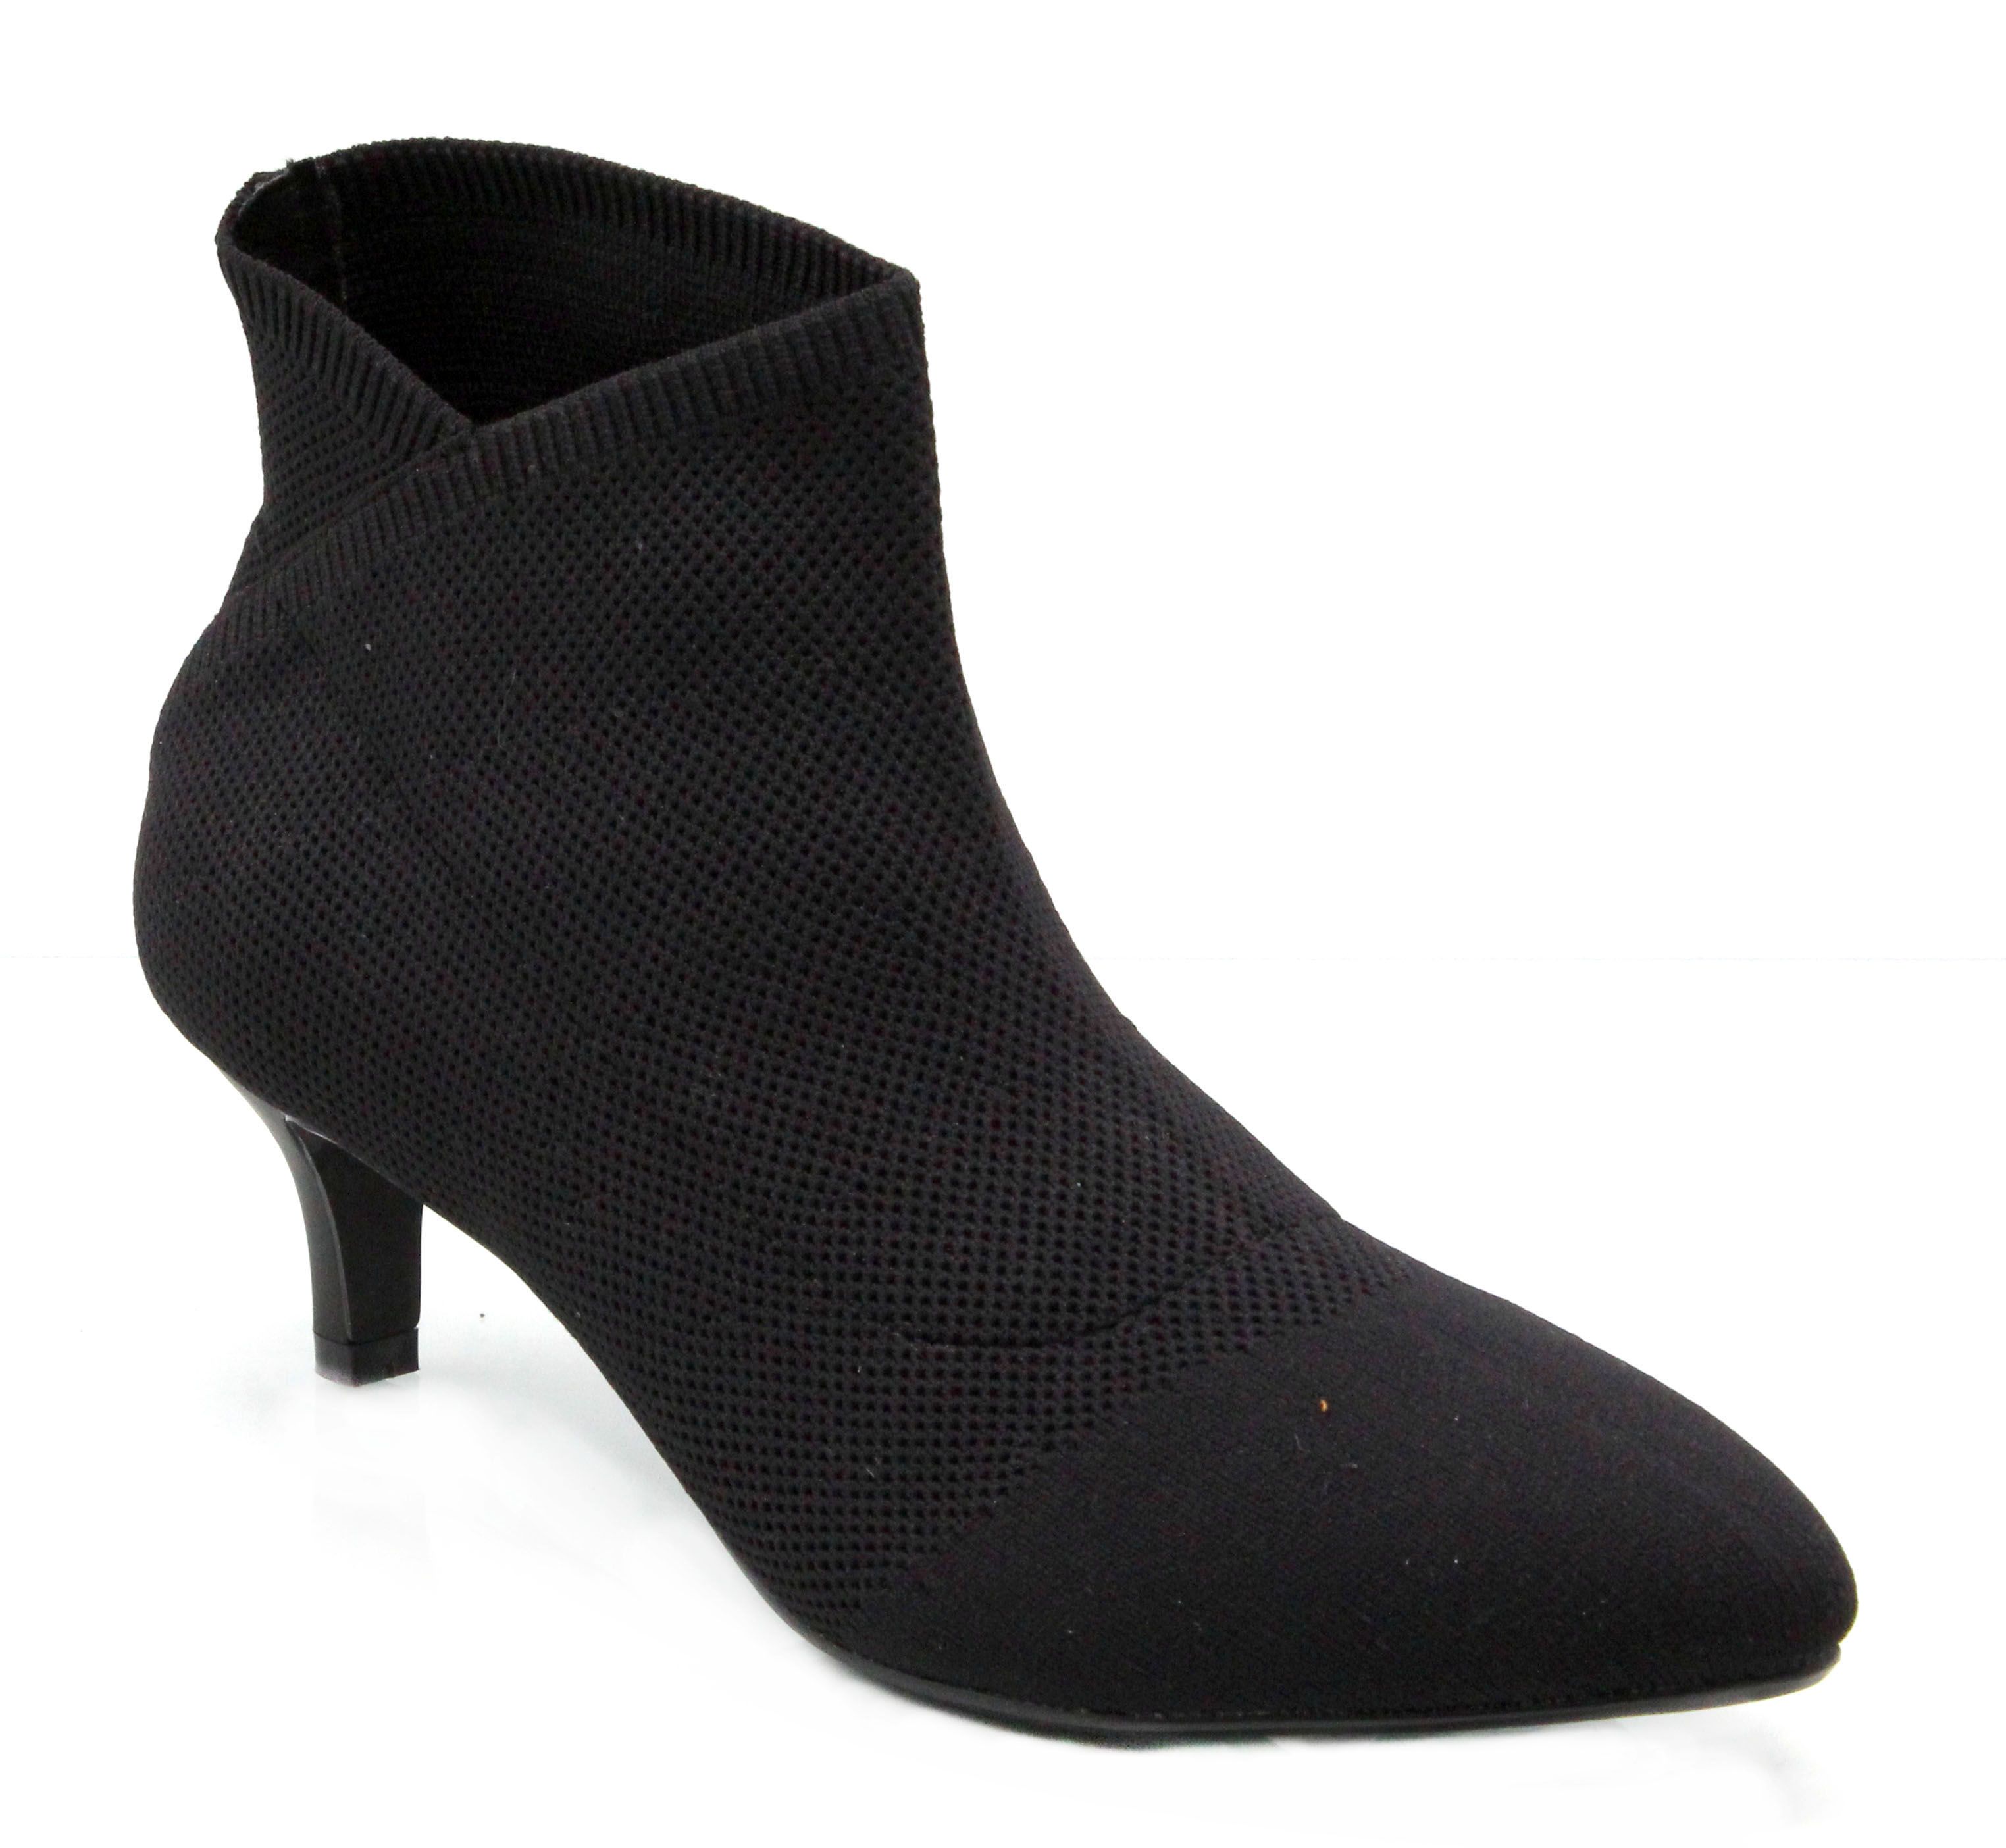 MIA Amore Ankle Booties - Leann - QVC.com